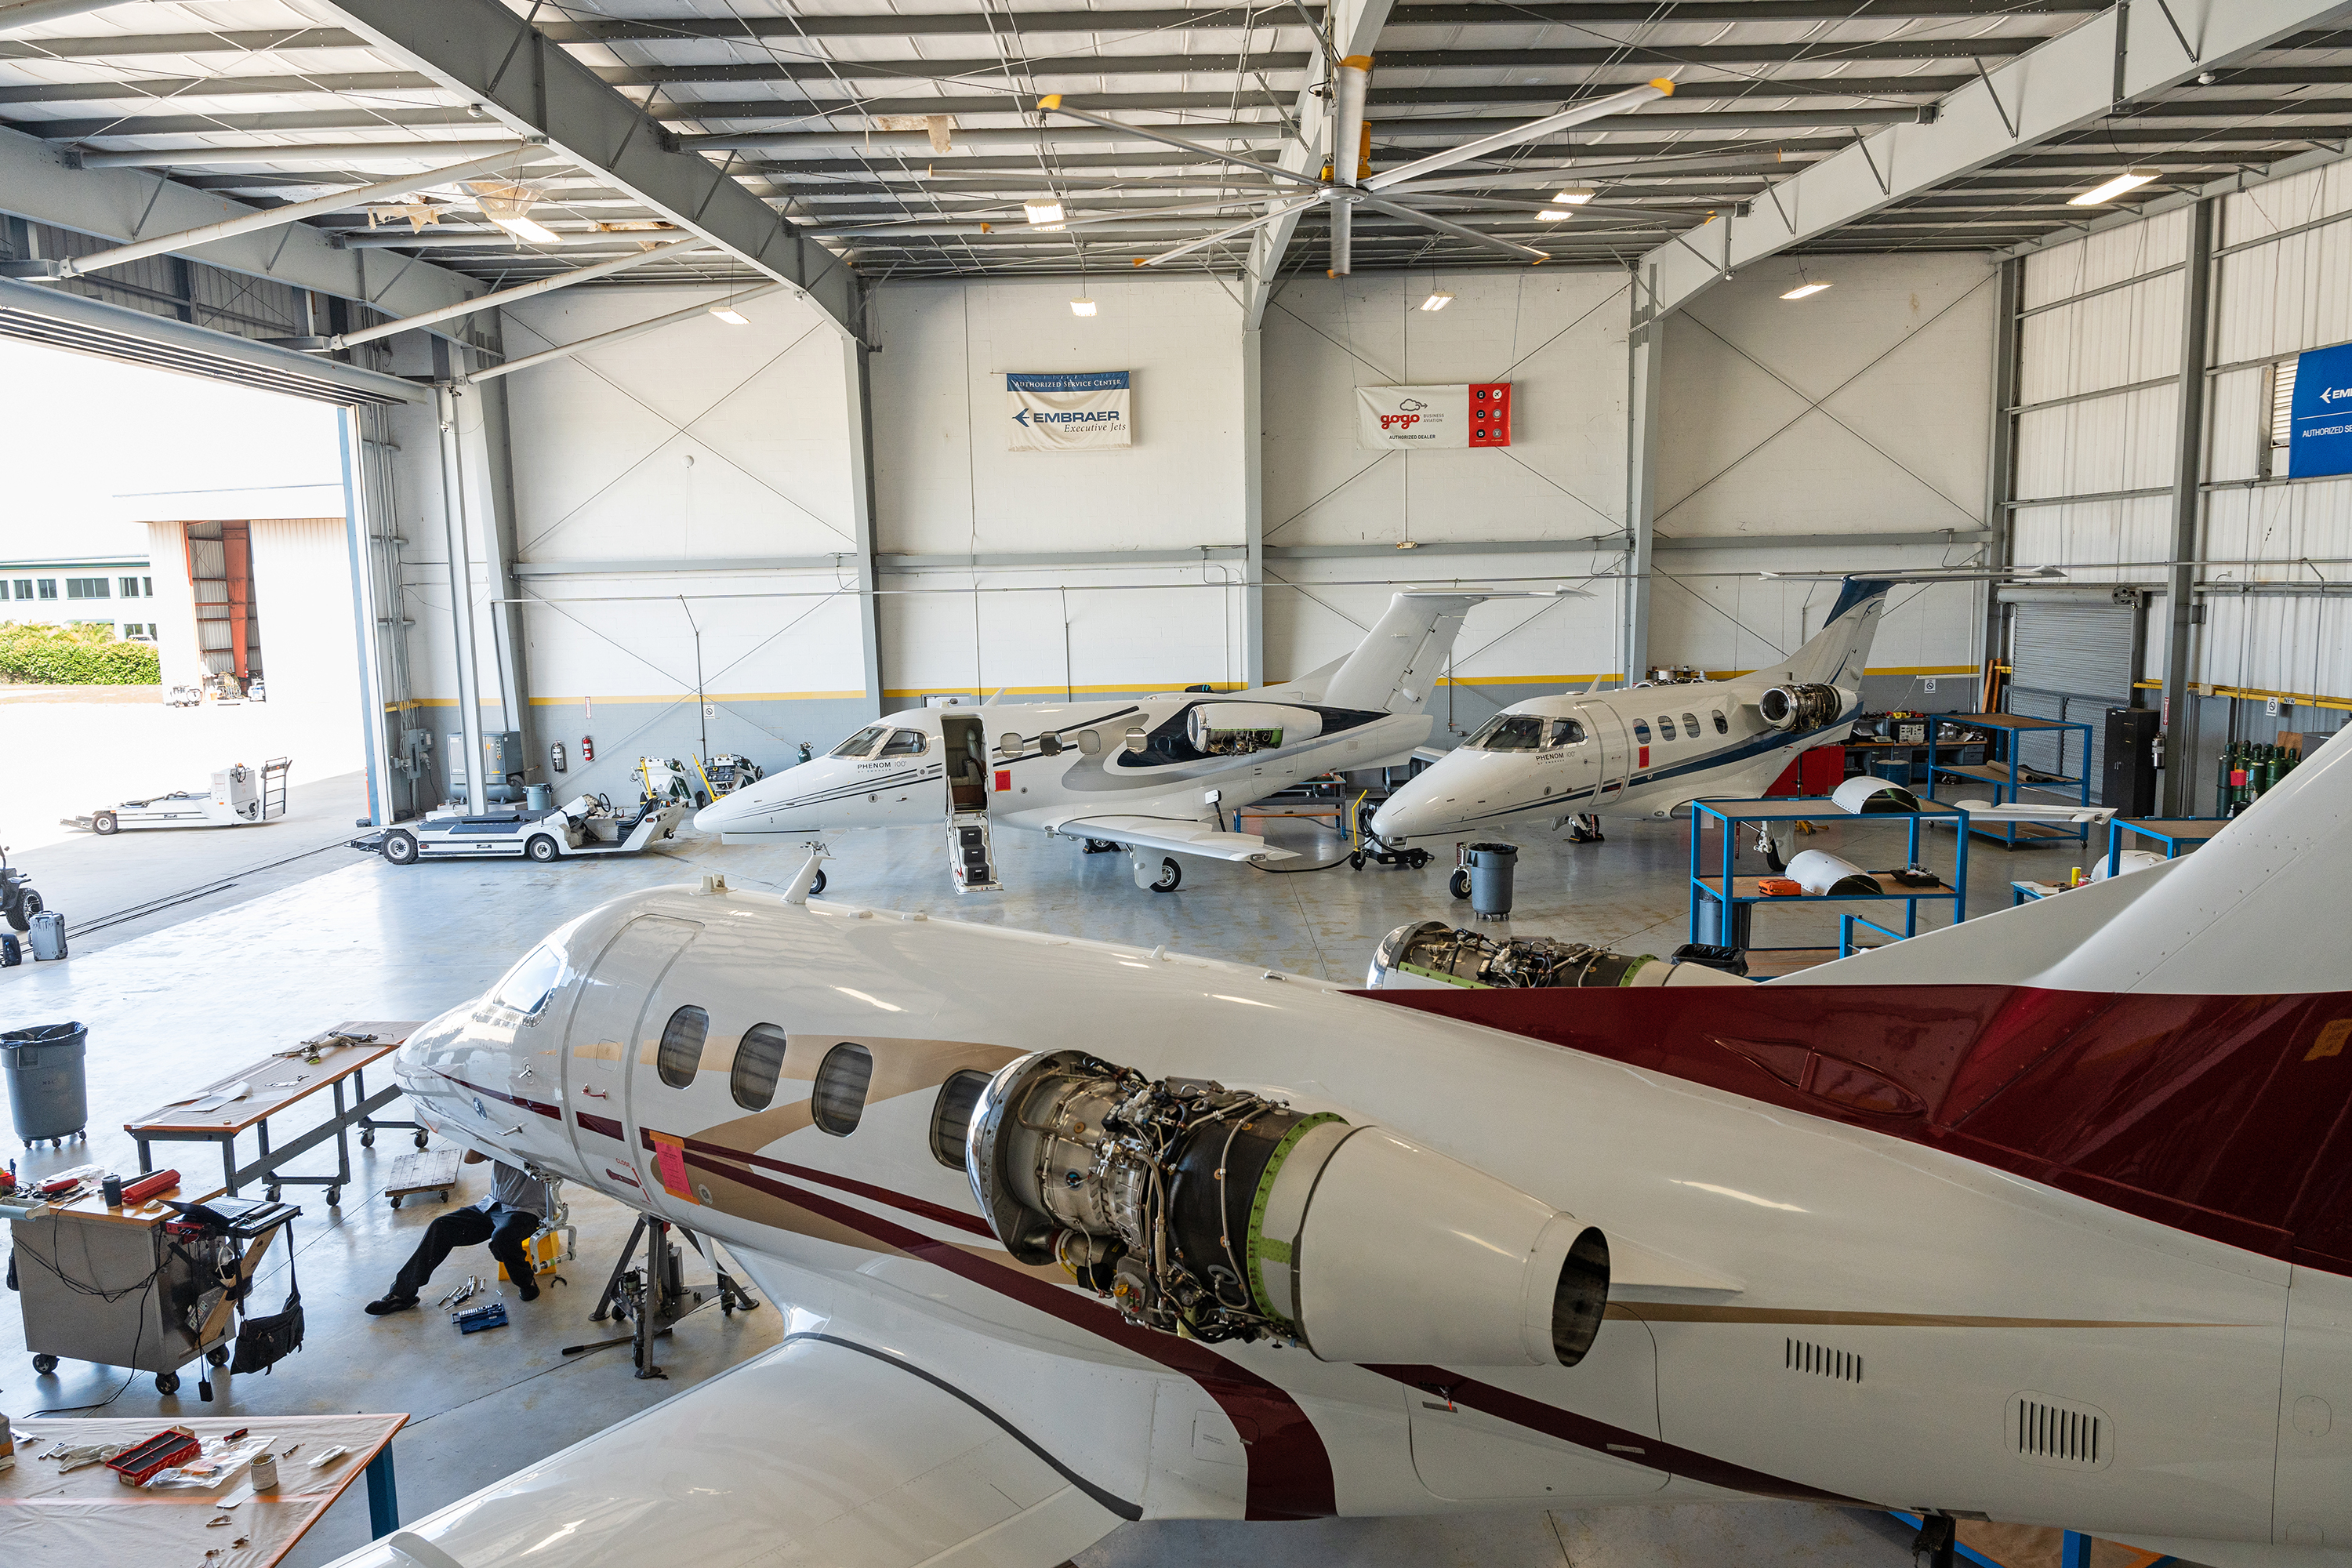 Jets in hangar services